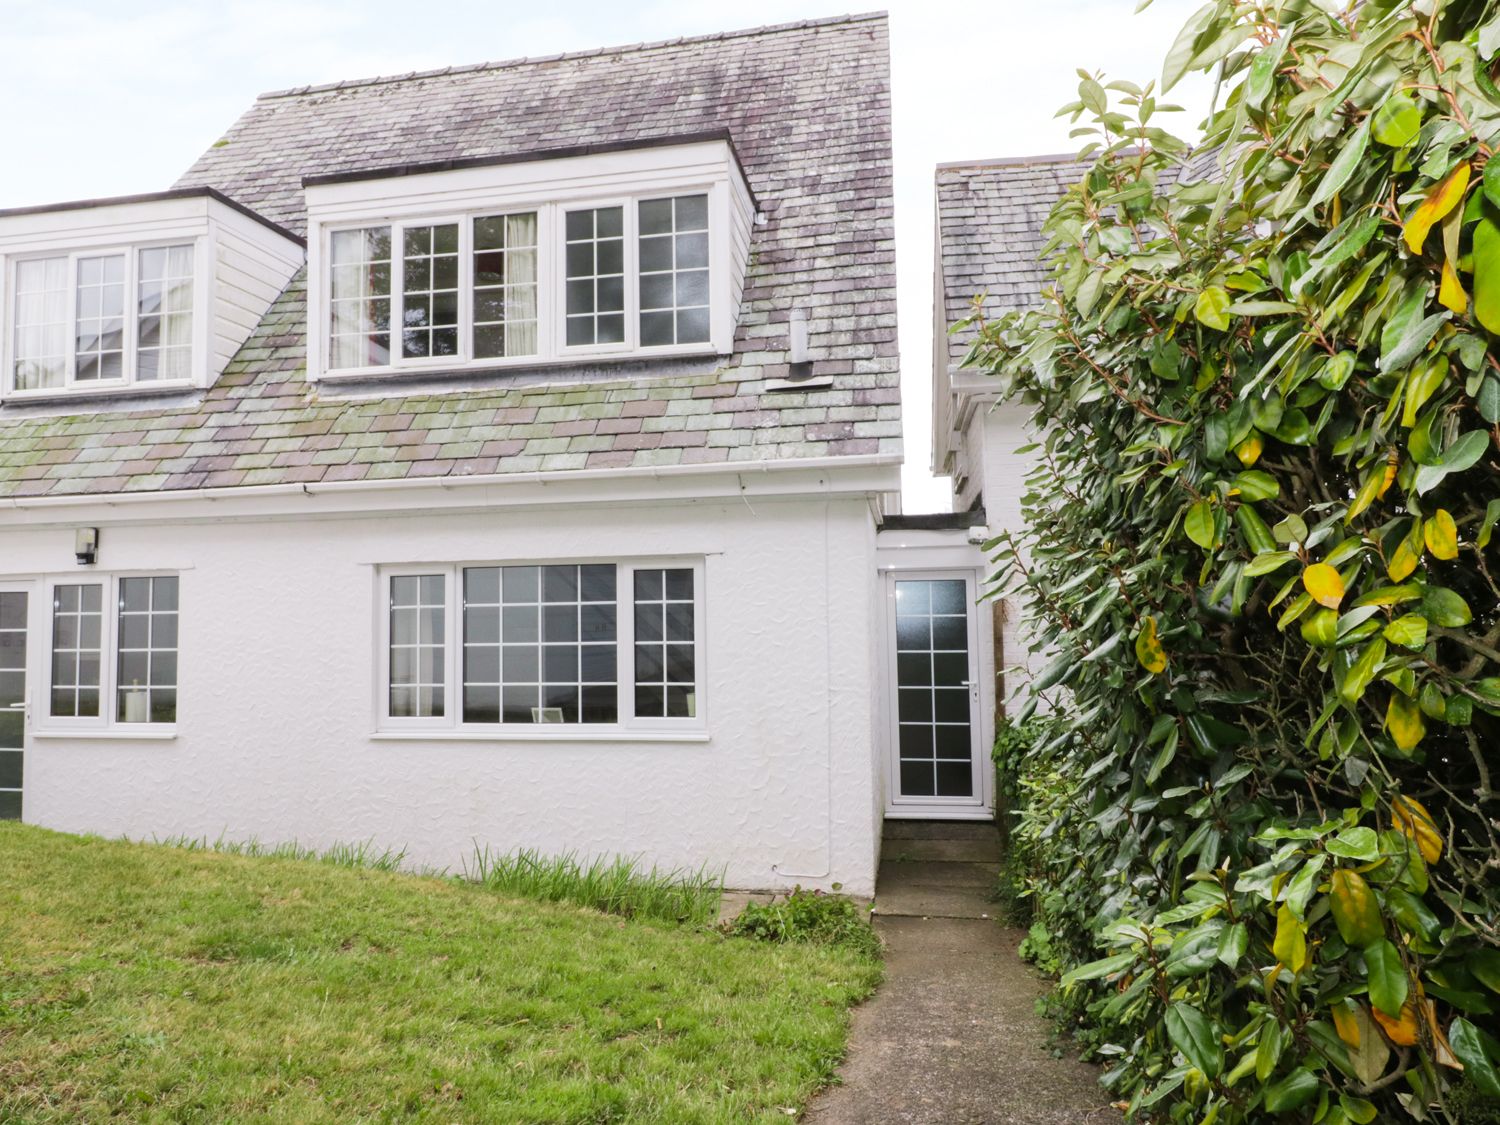 The Cottage at Wylan Hall - Anglesey - 957505 - photo 1